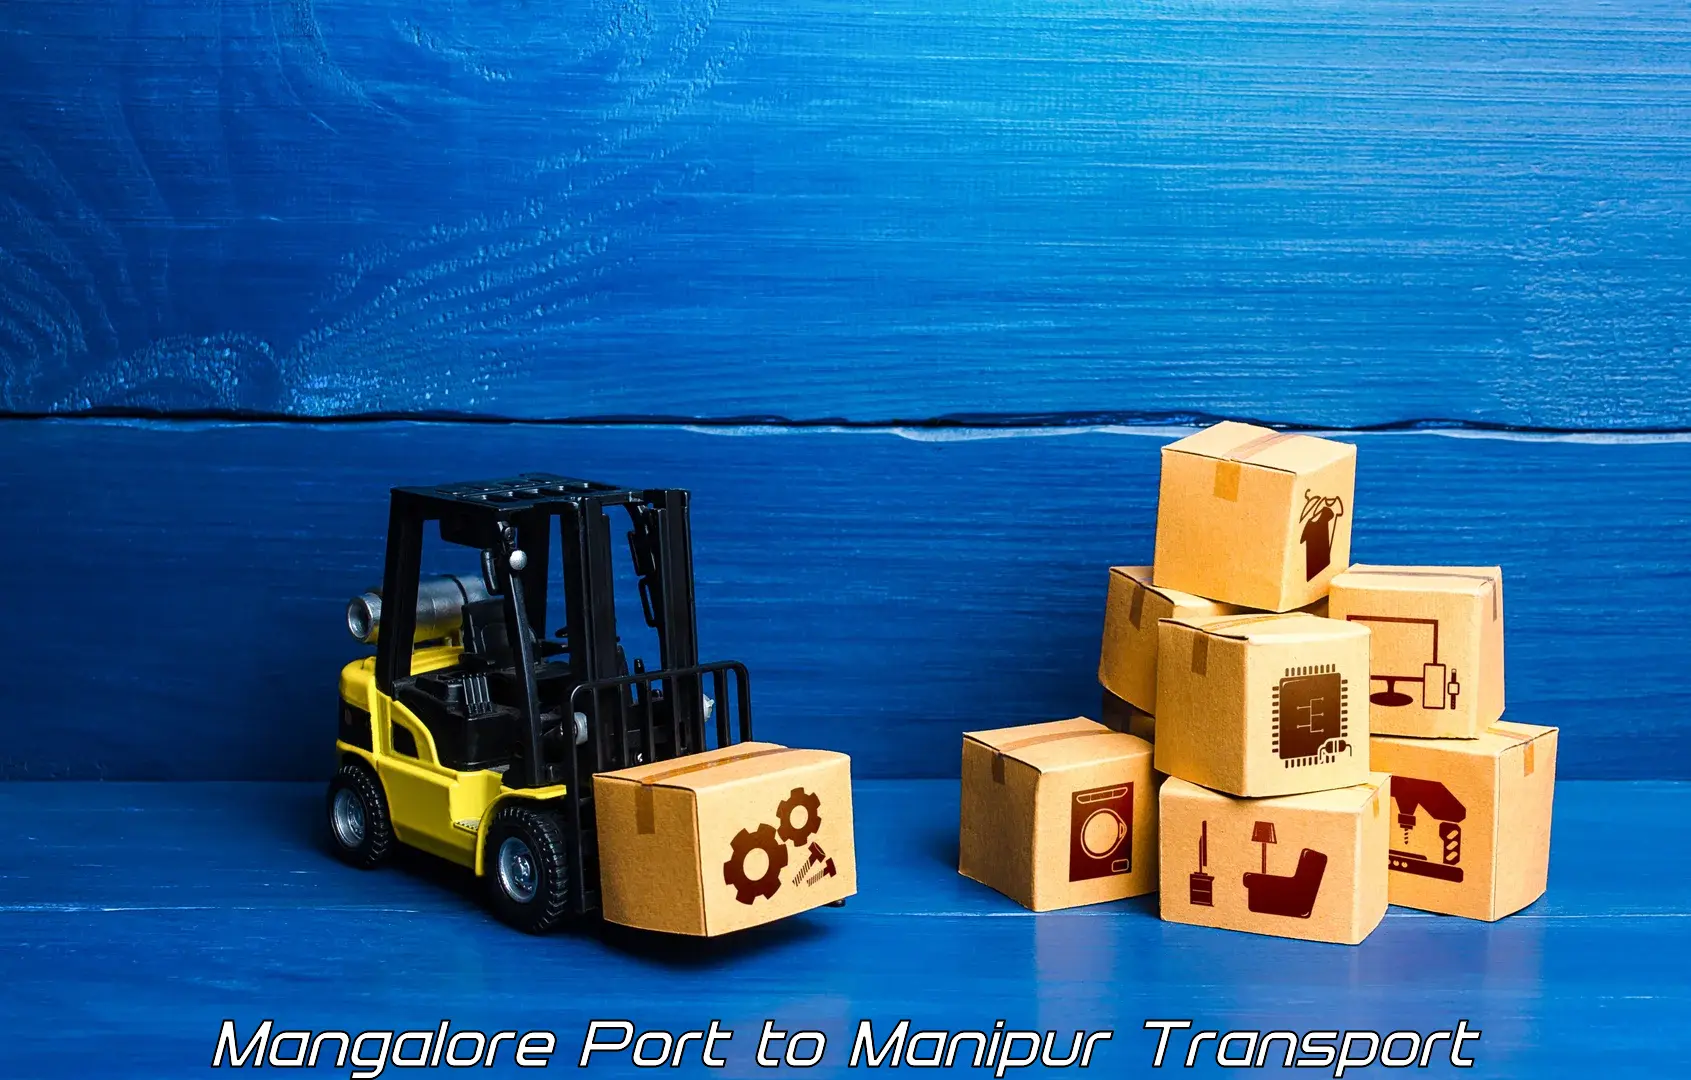 Delivery service Mangalore Port to Manipur